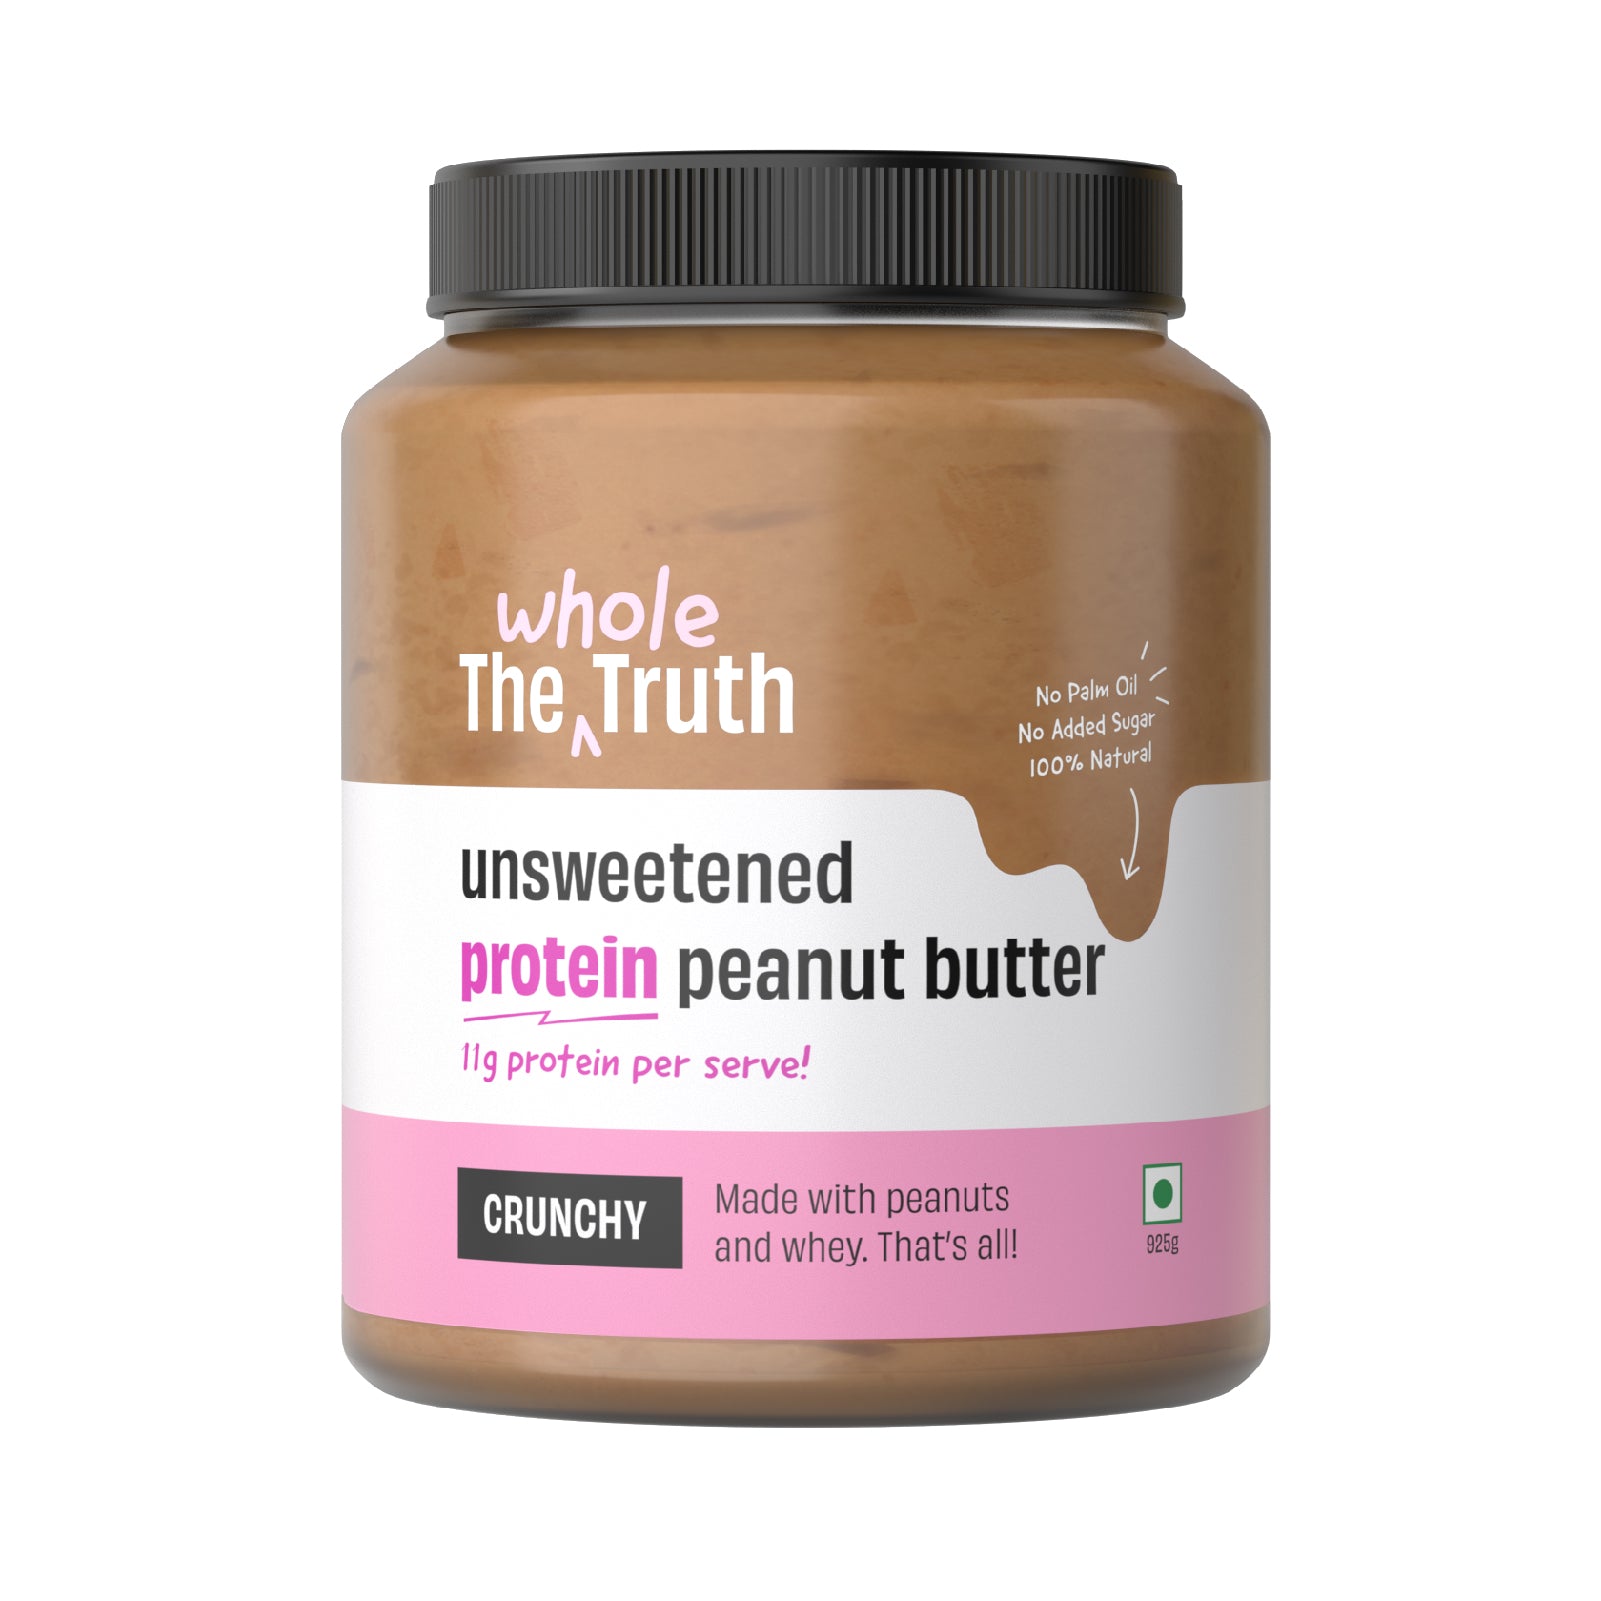 The Whole Truth - Unsweetened Protein Peanut Butter - Crunchy | All Natural | Gluten Free | Vegan | 925g